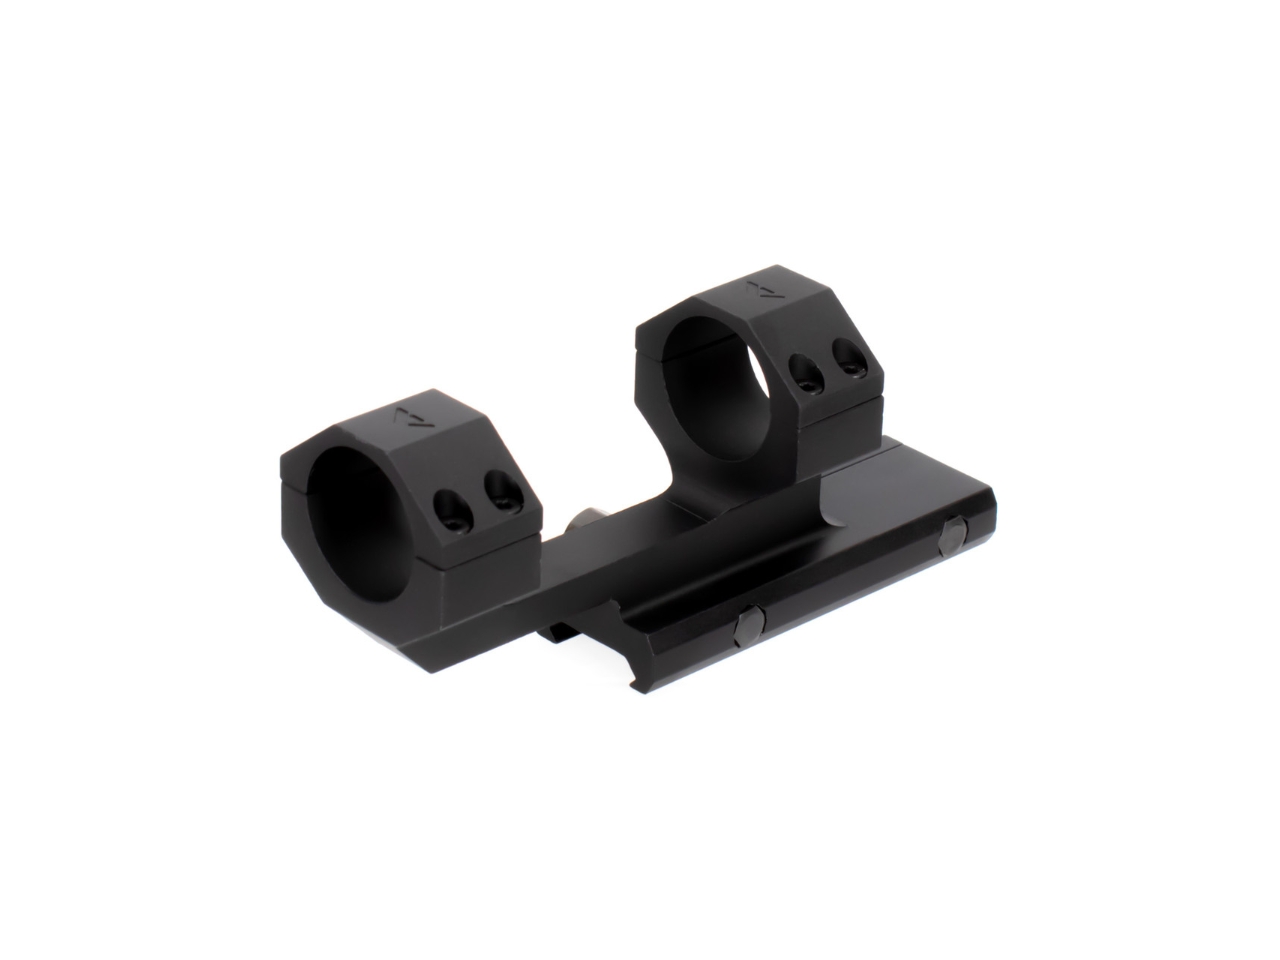 AIM 1" Cantilever Scope Mount 1.5" Height